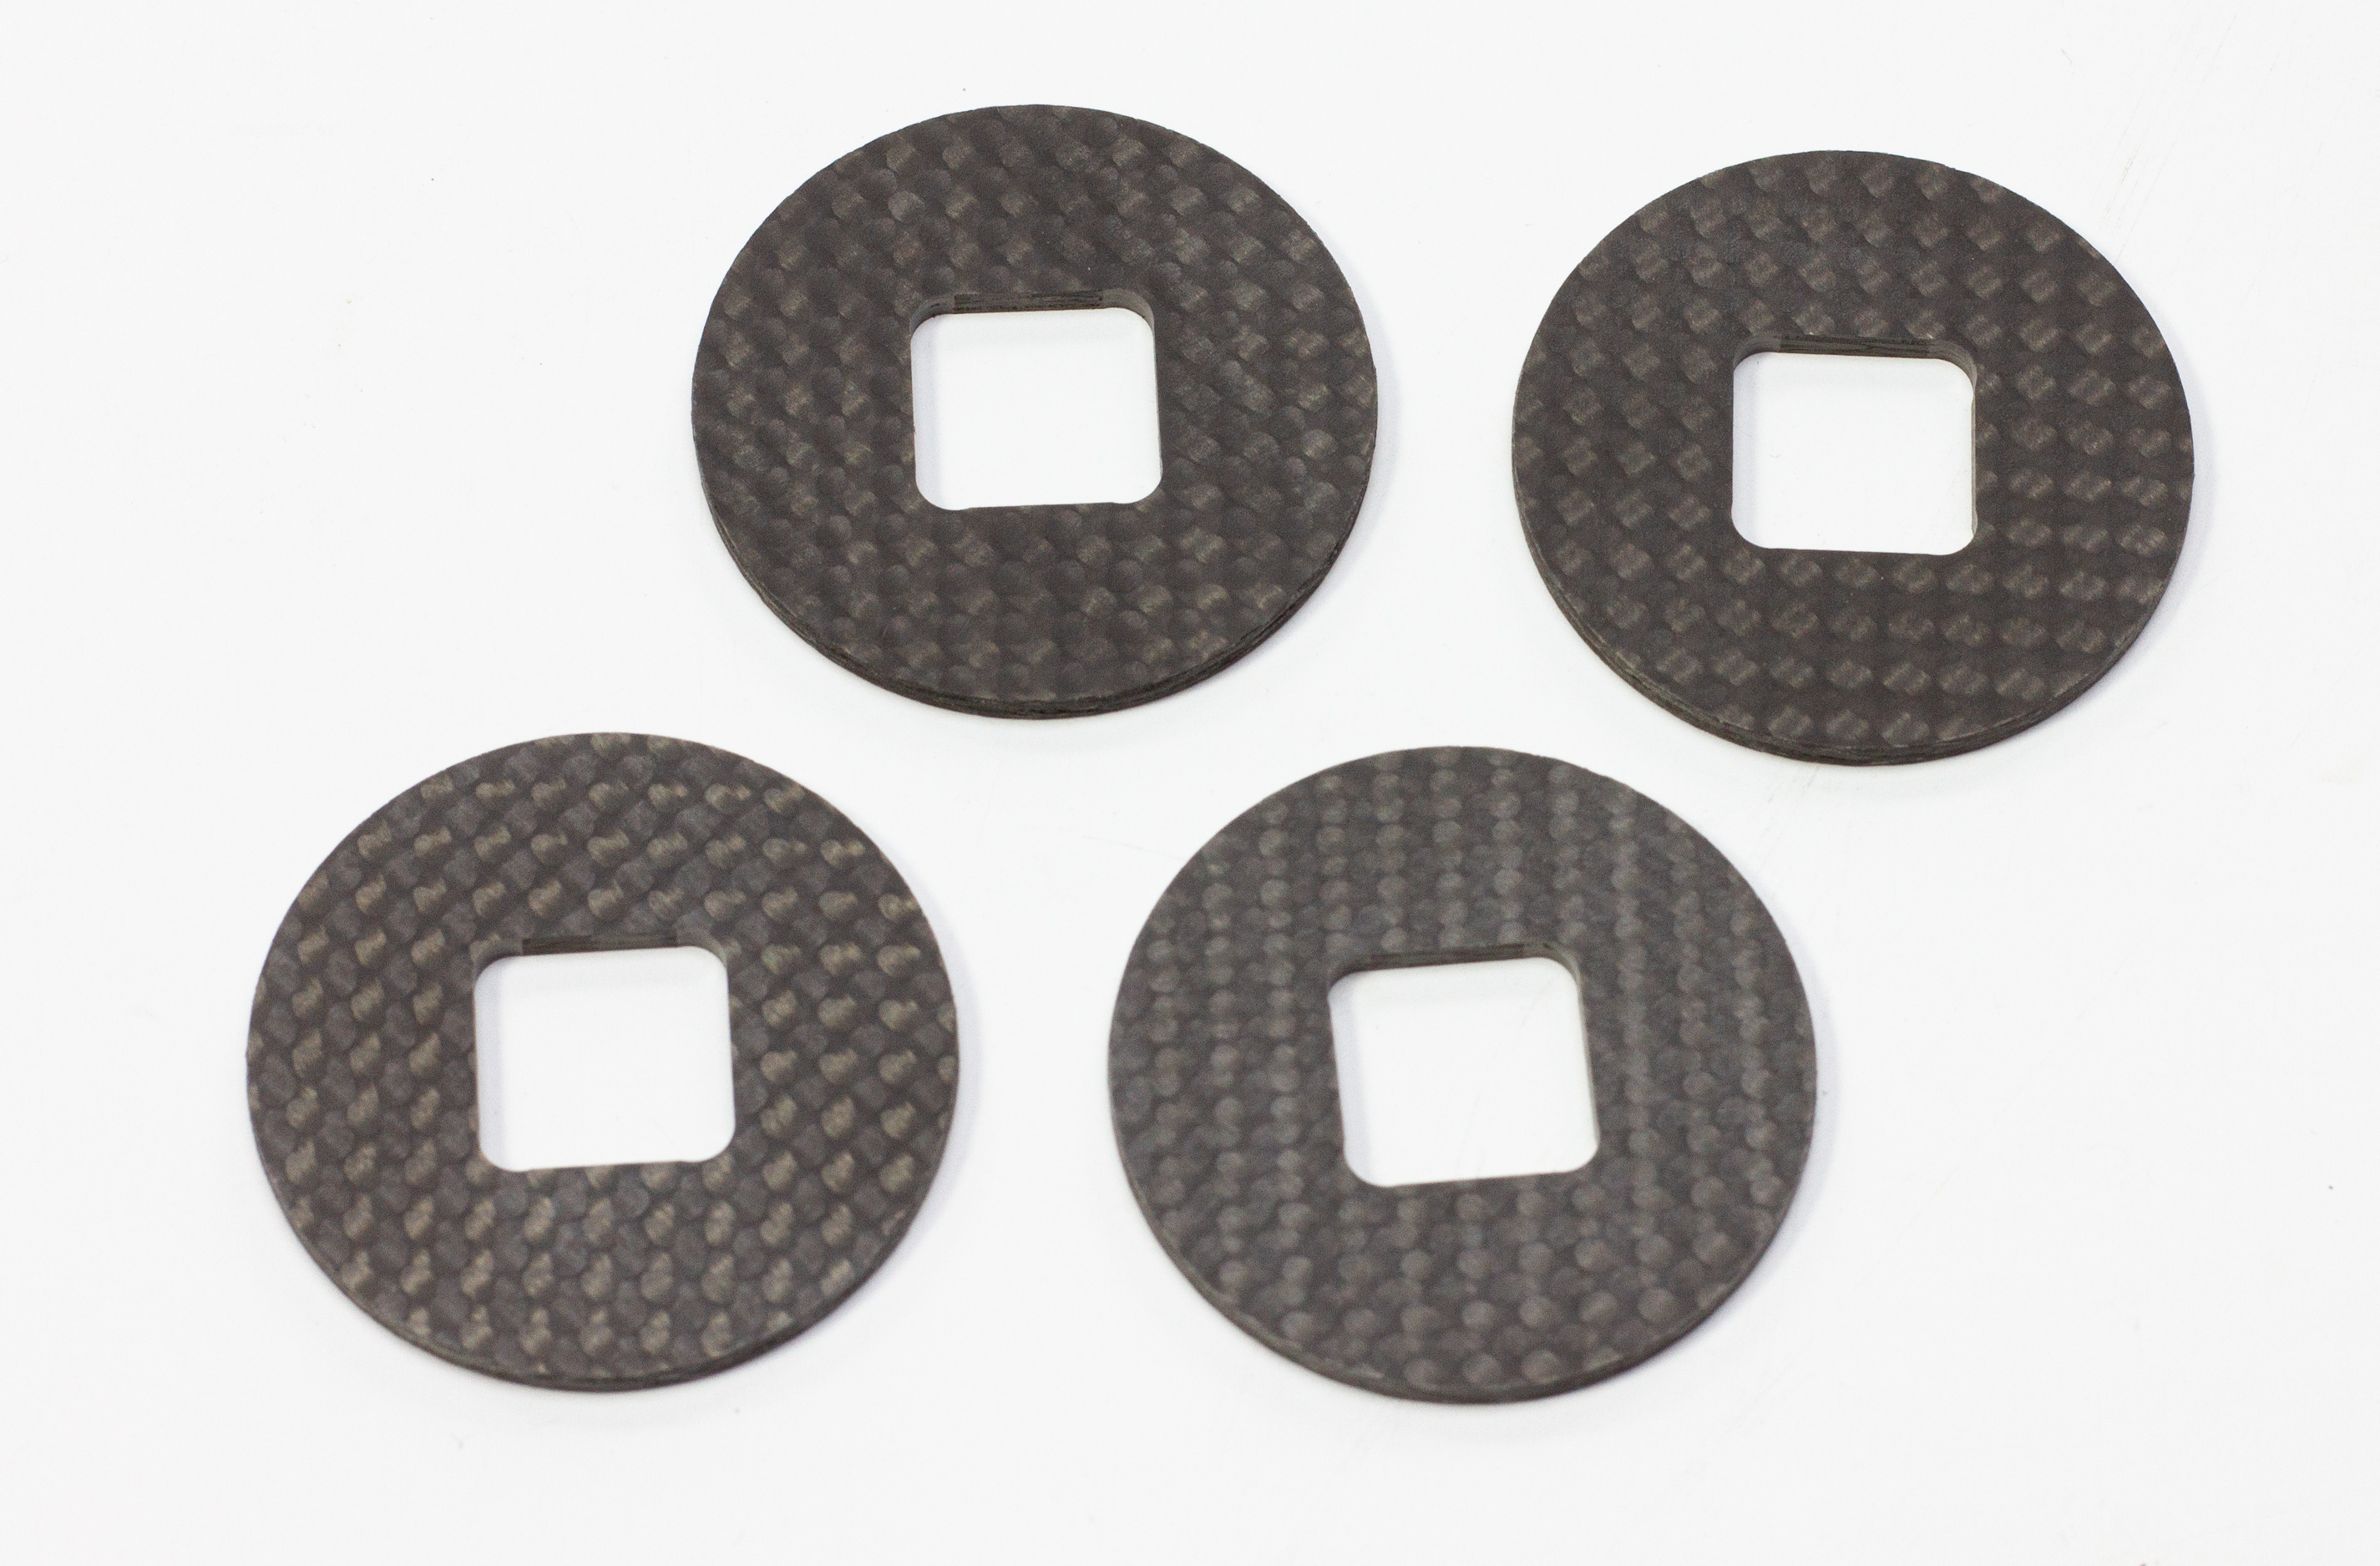 2015-18 Mecatech Carbon friction discs small